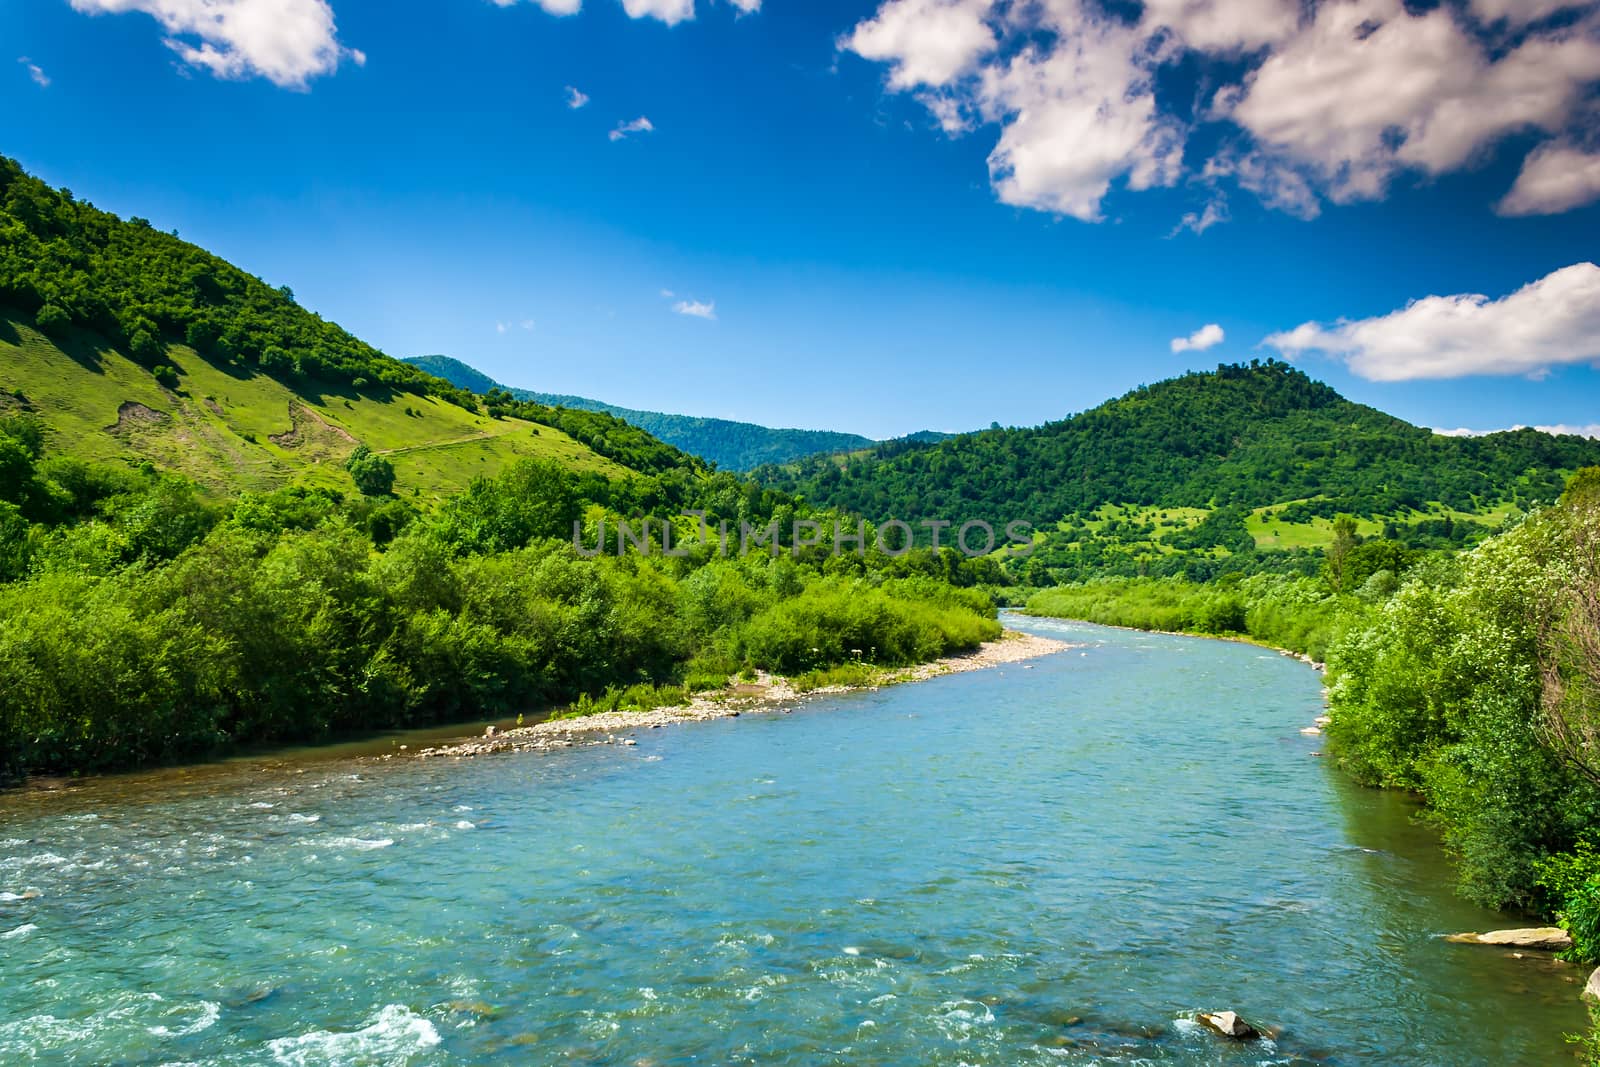 wild river flowing between green mountains on a clear summer day